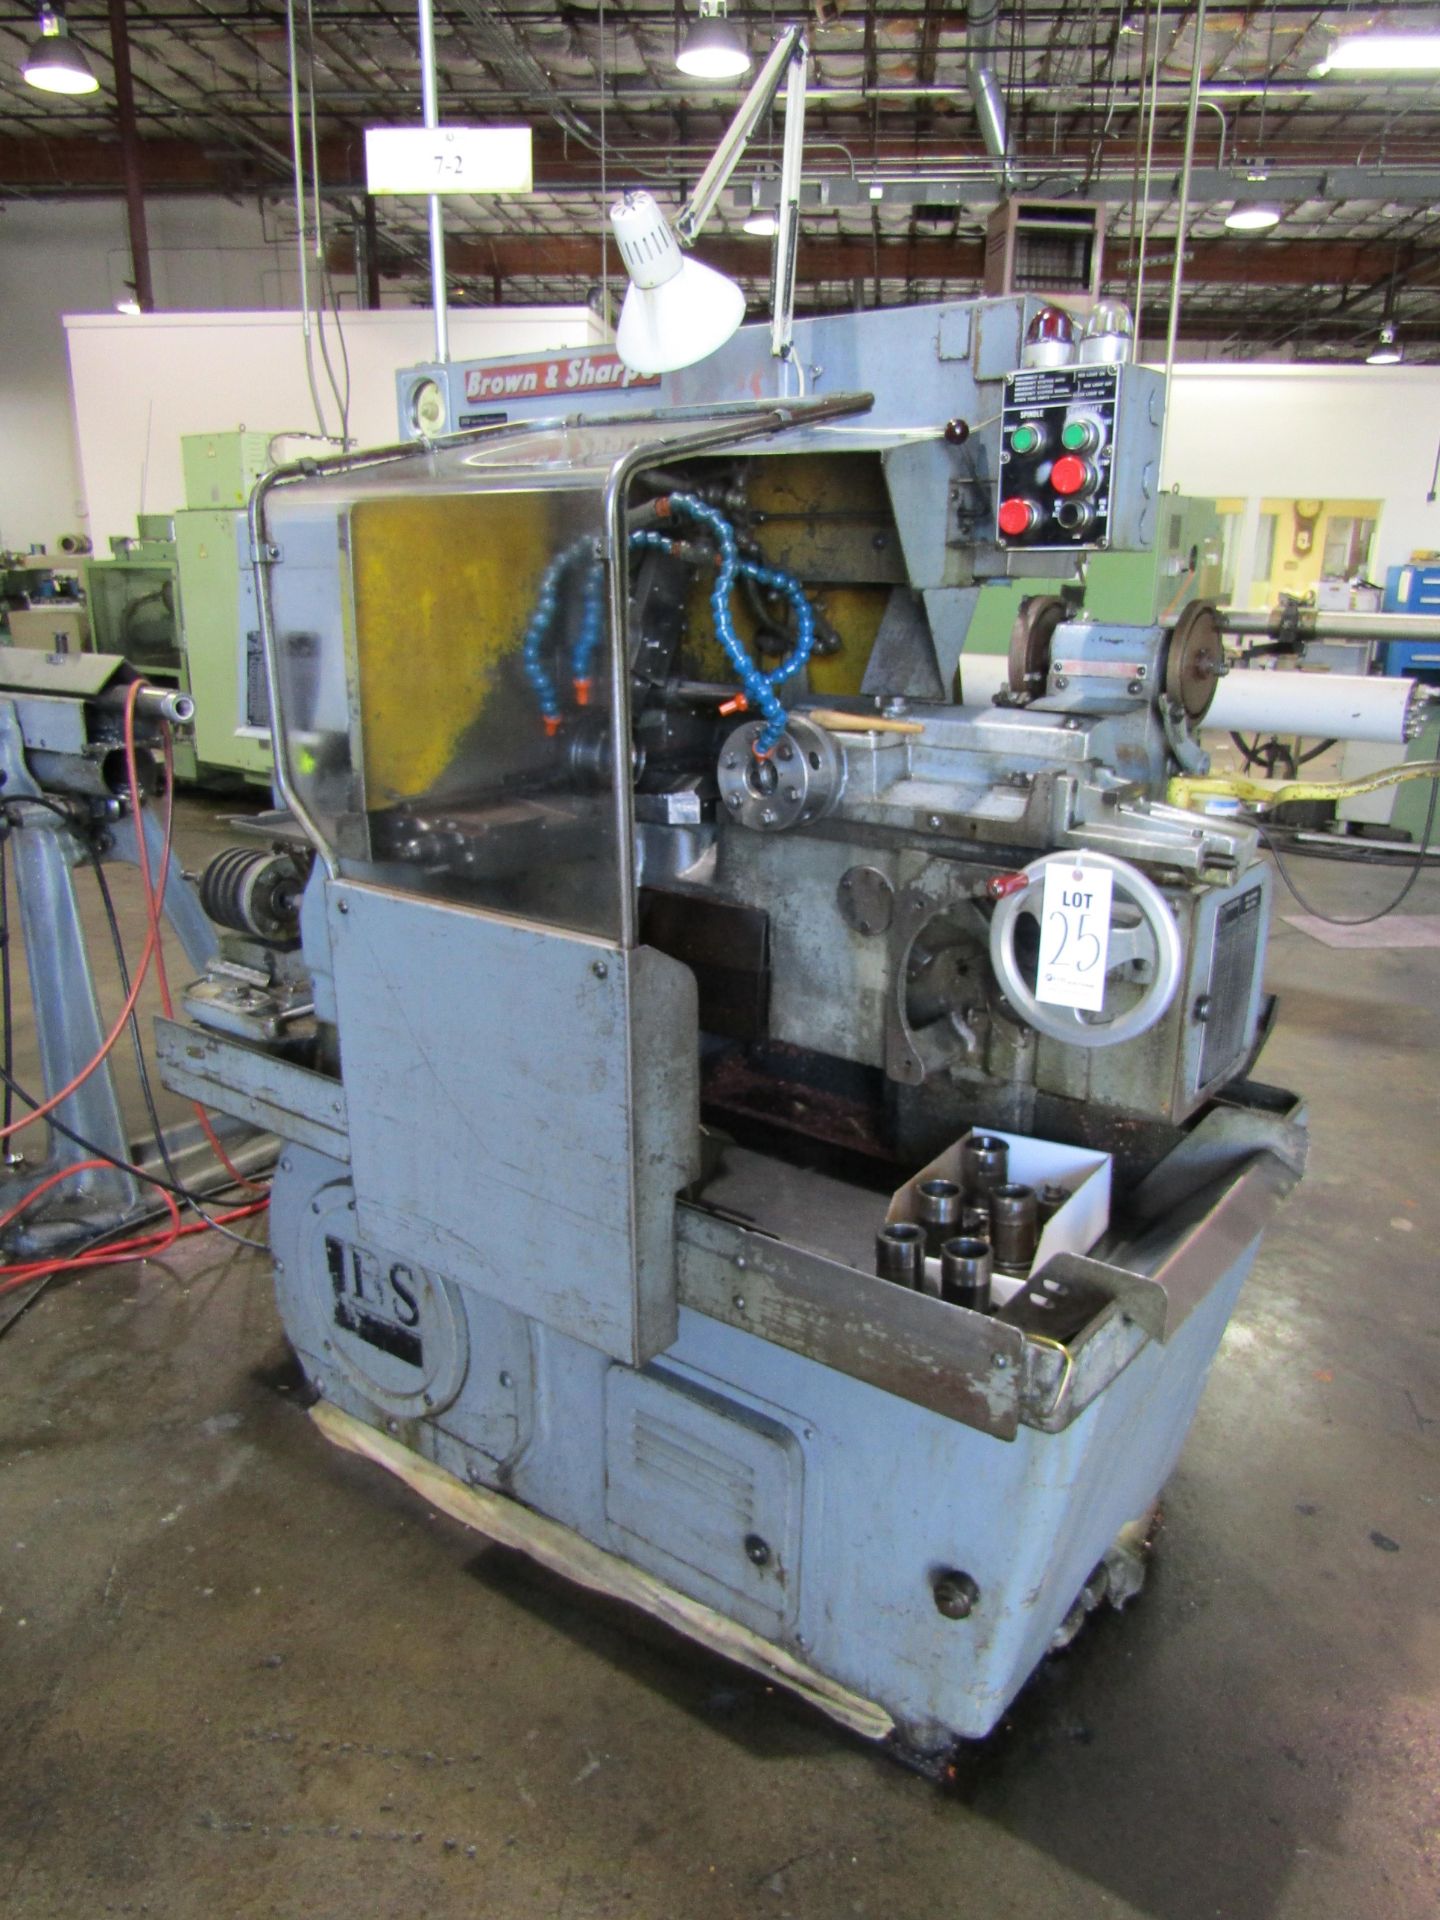 BROWNE & SHARPE AUTOMATIC LATHE SCREW MACHINE, SERIAL 542-2-6927-1 5/8. LOT TO INCLUDE: ASSOCIATED